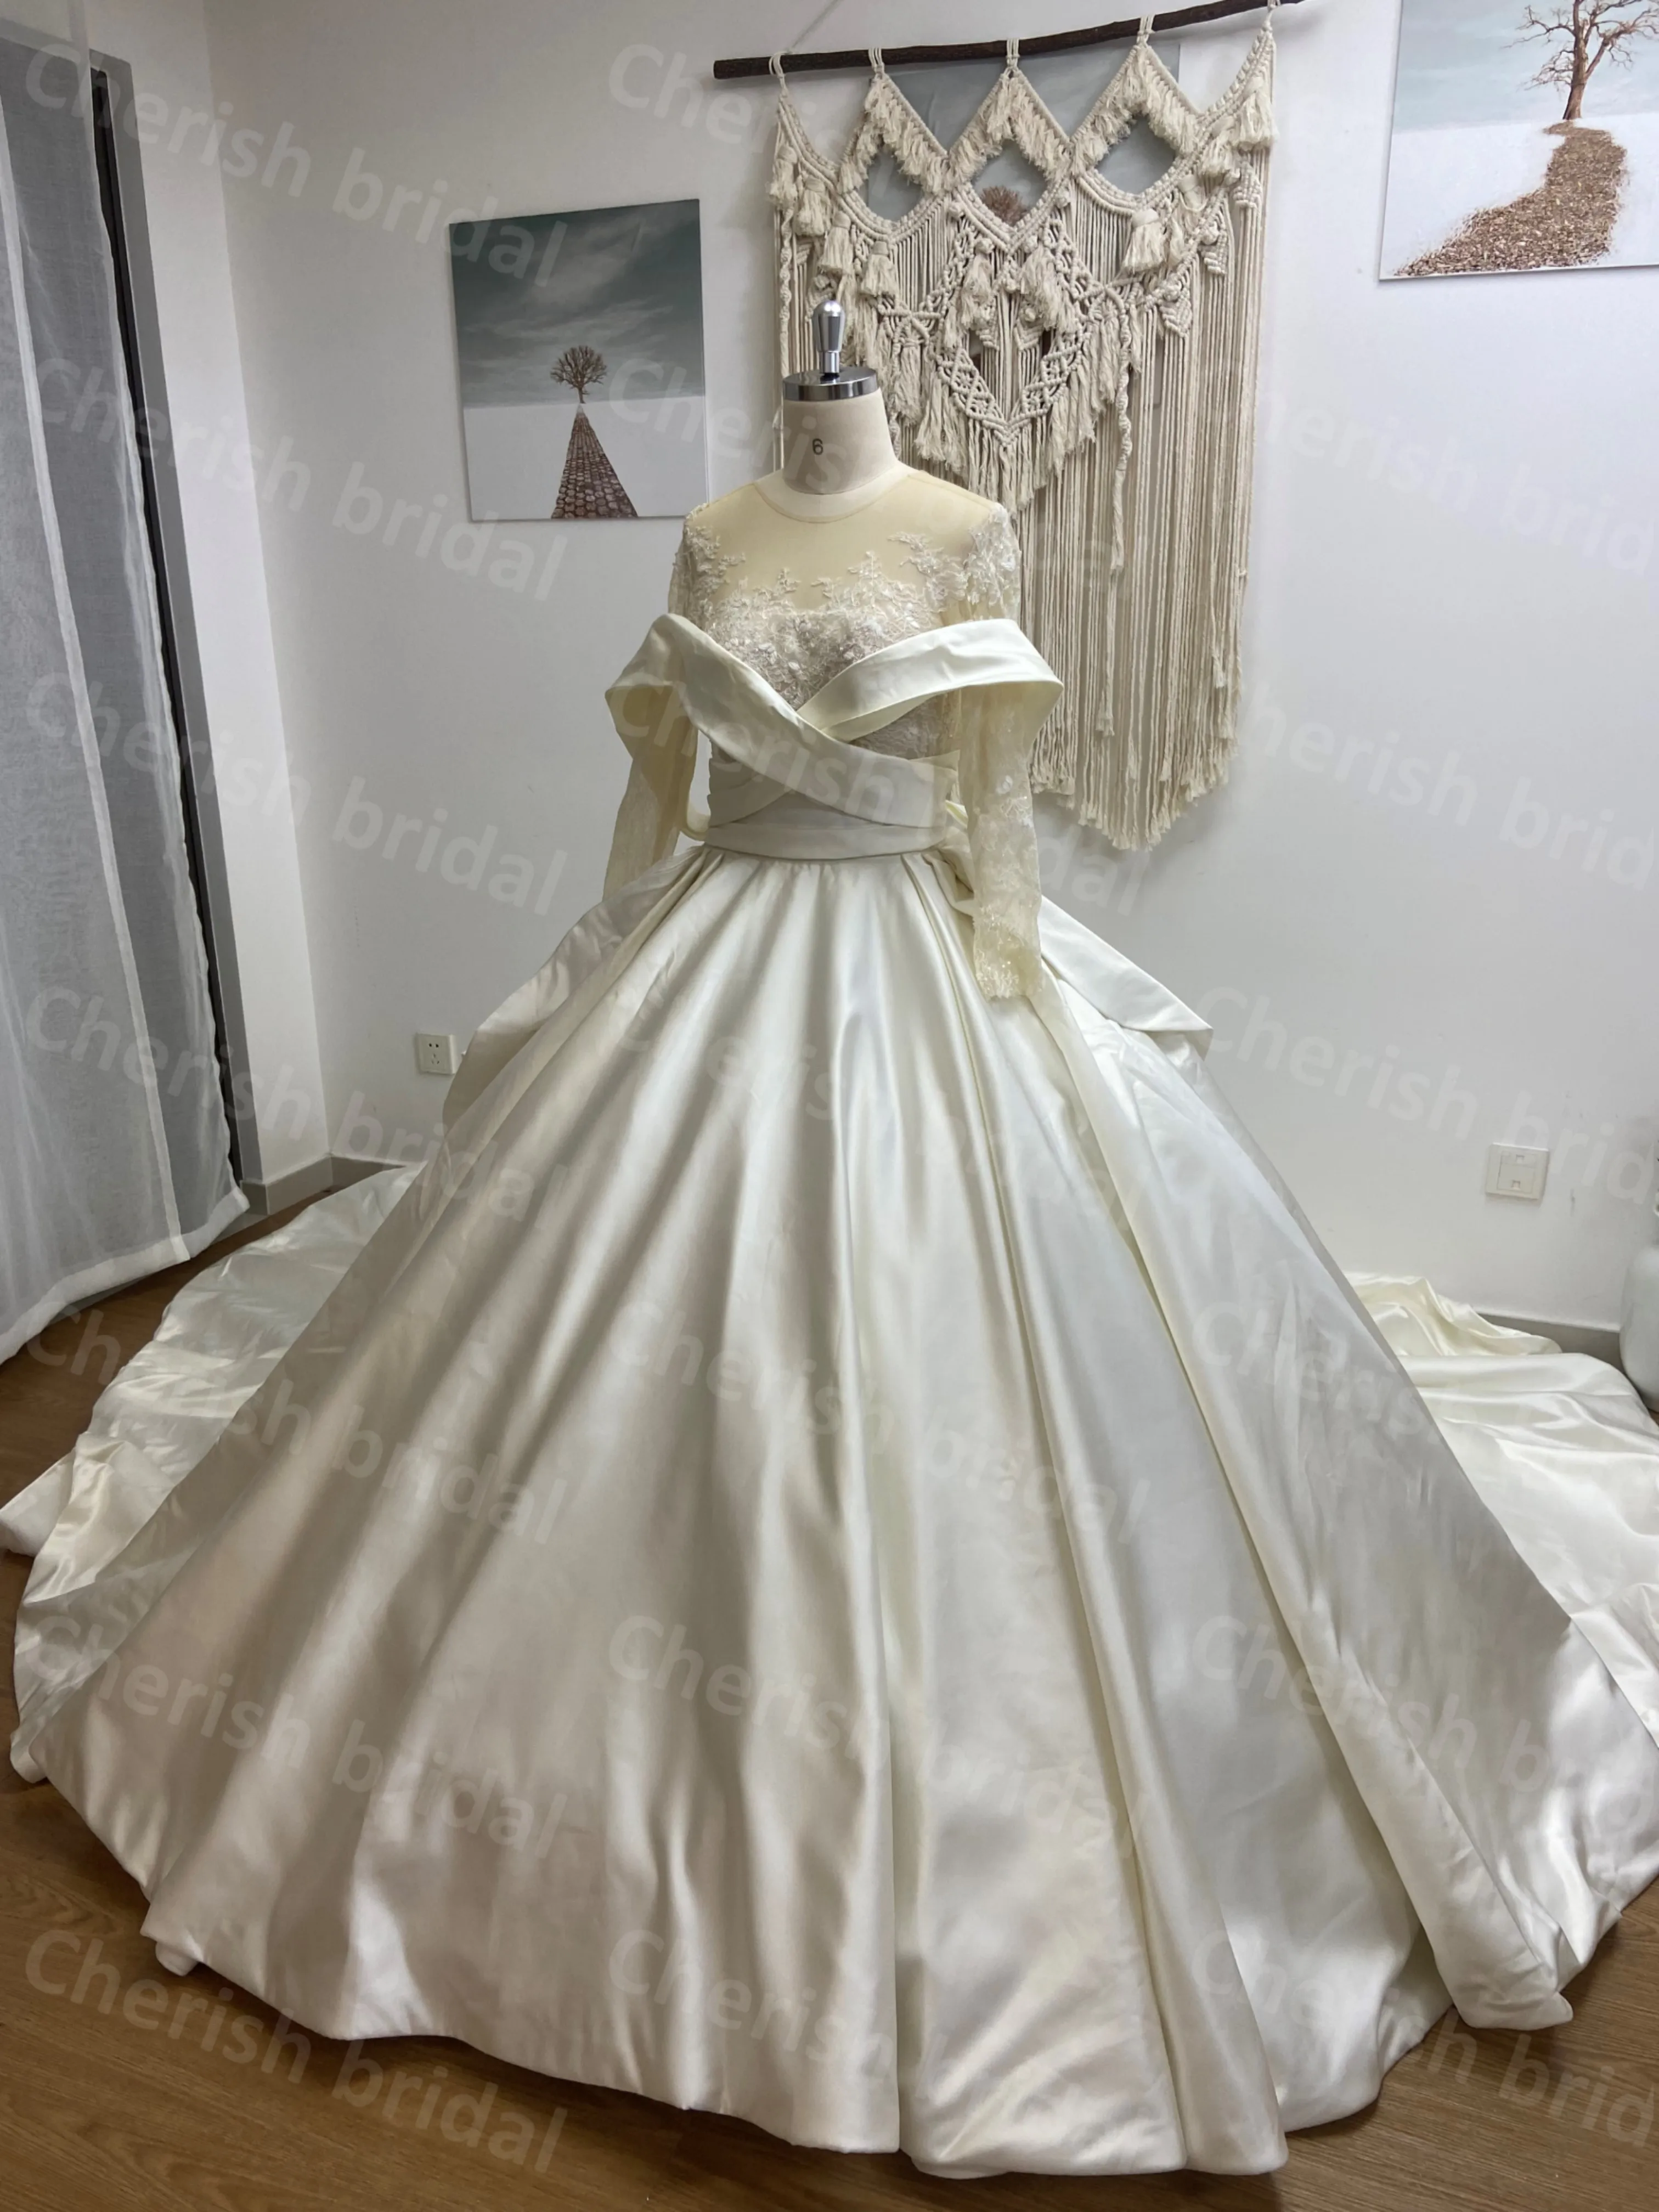 

C5078B Satin Ball Gown Wedding Dress for Bride, Long Sleeve Lace Applique and Beading Bride Dress Backless Princess Bridal Gown